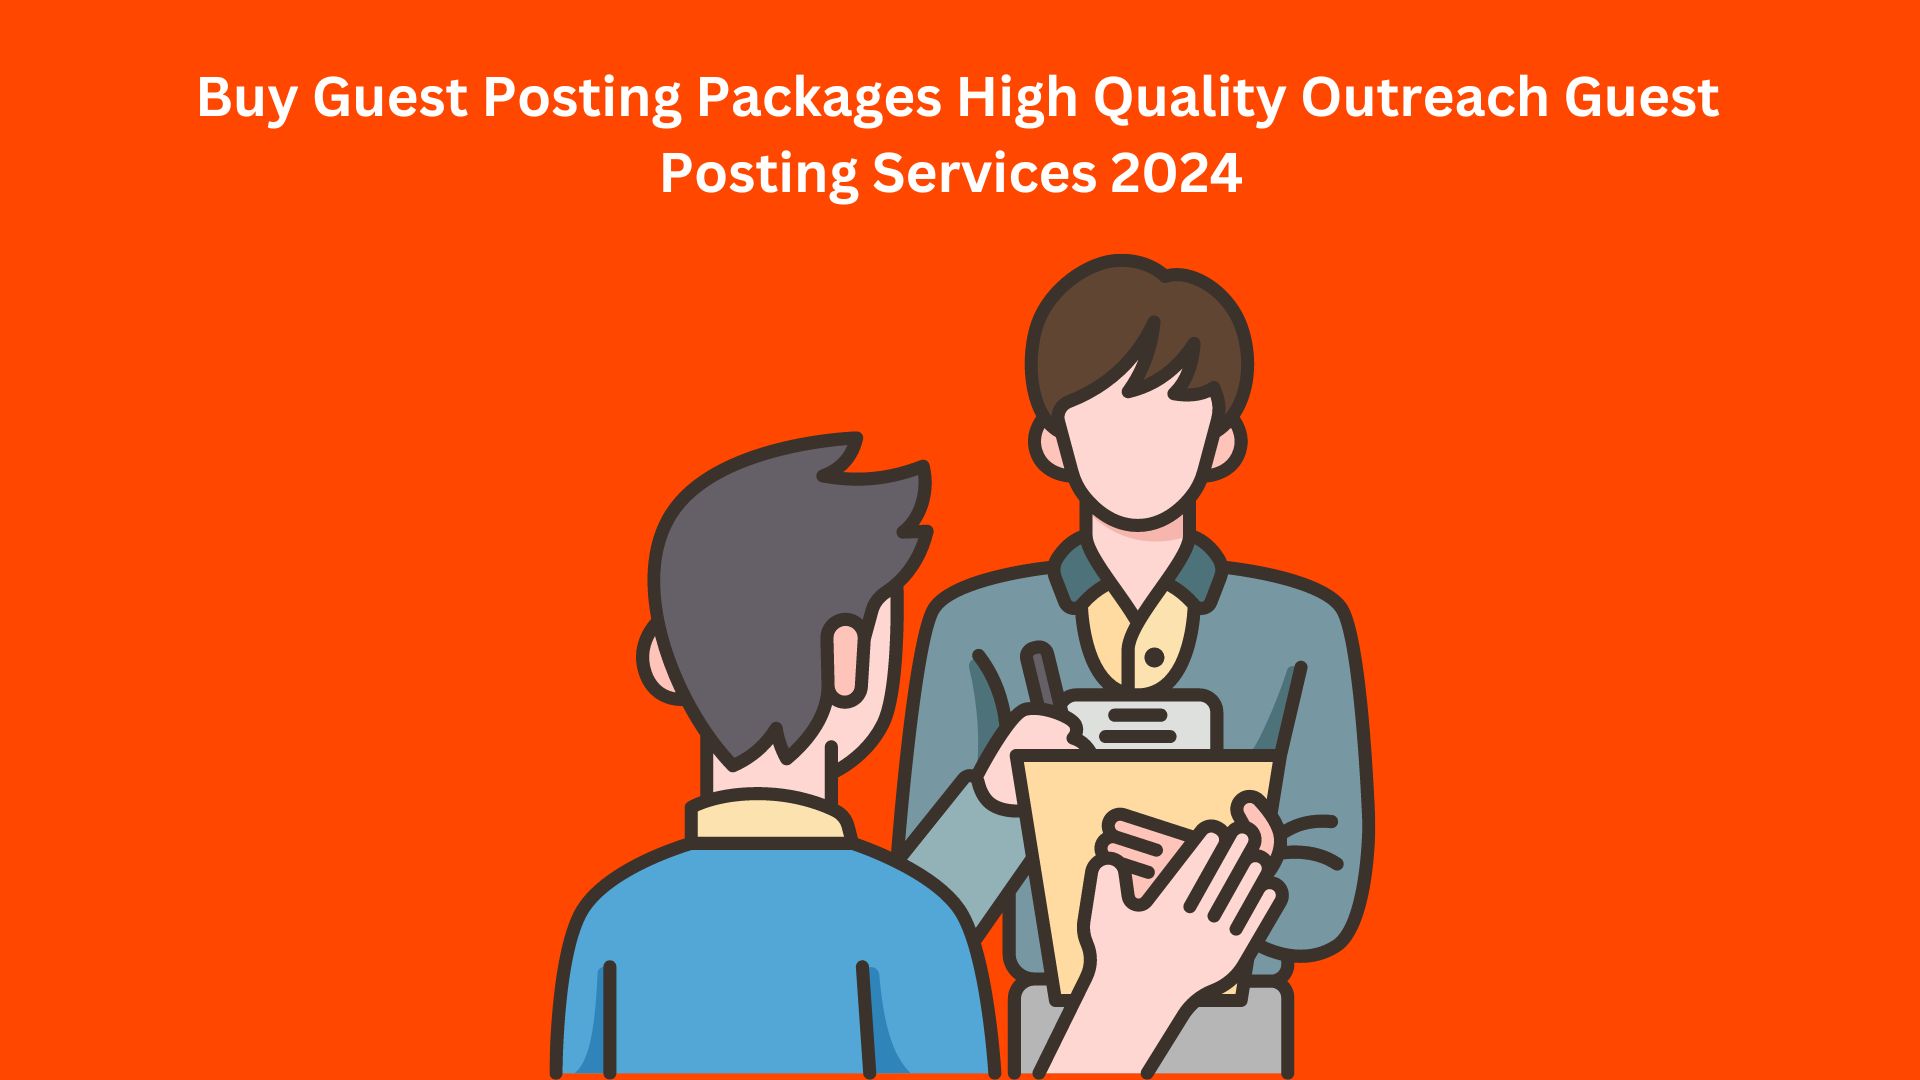 Buy Guest Posting Packages High Quality Outreach Guest Posting Services 2024